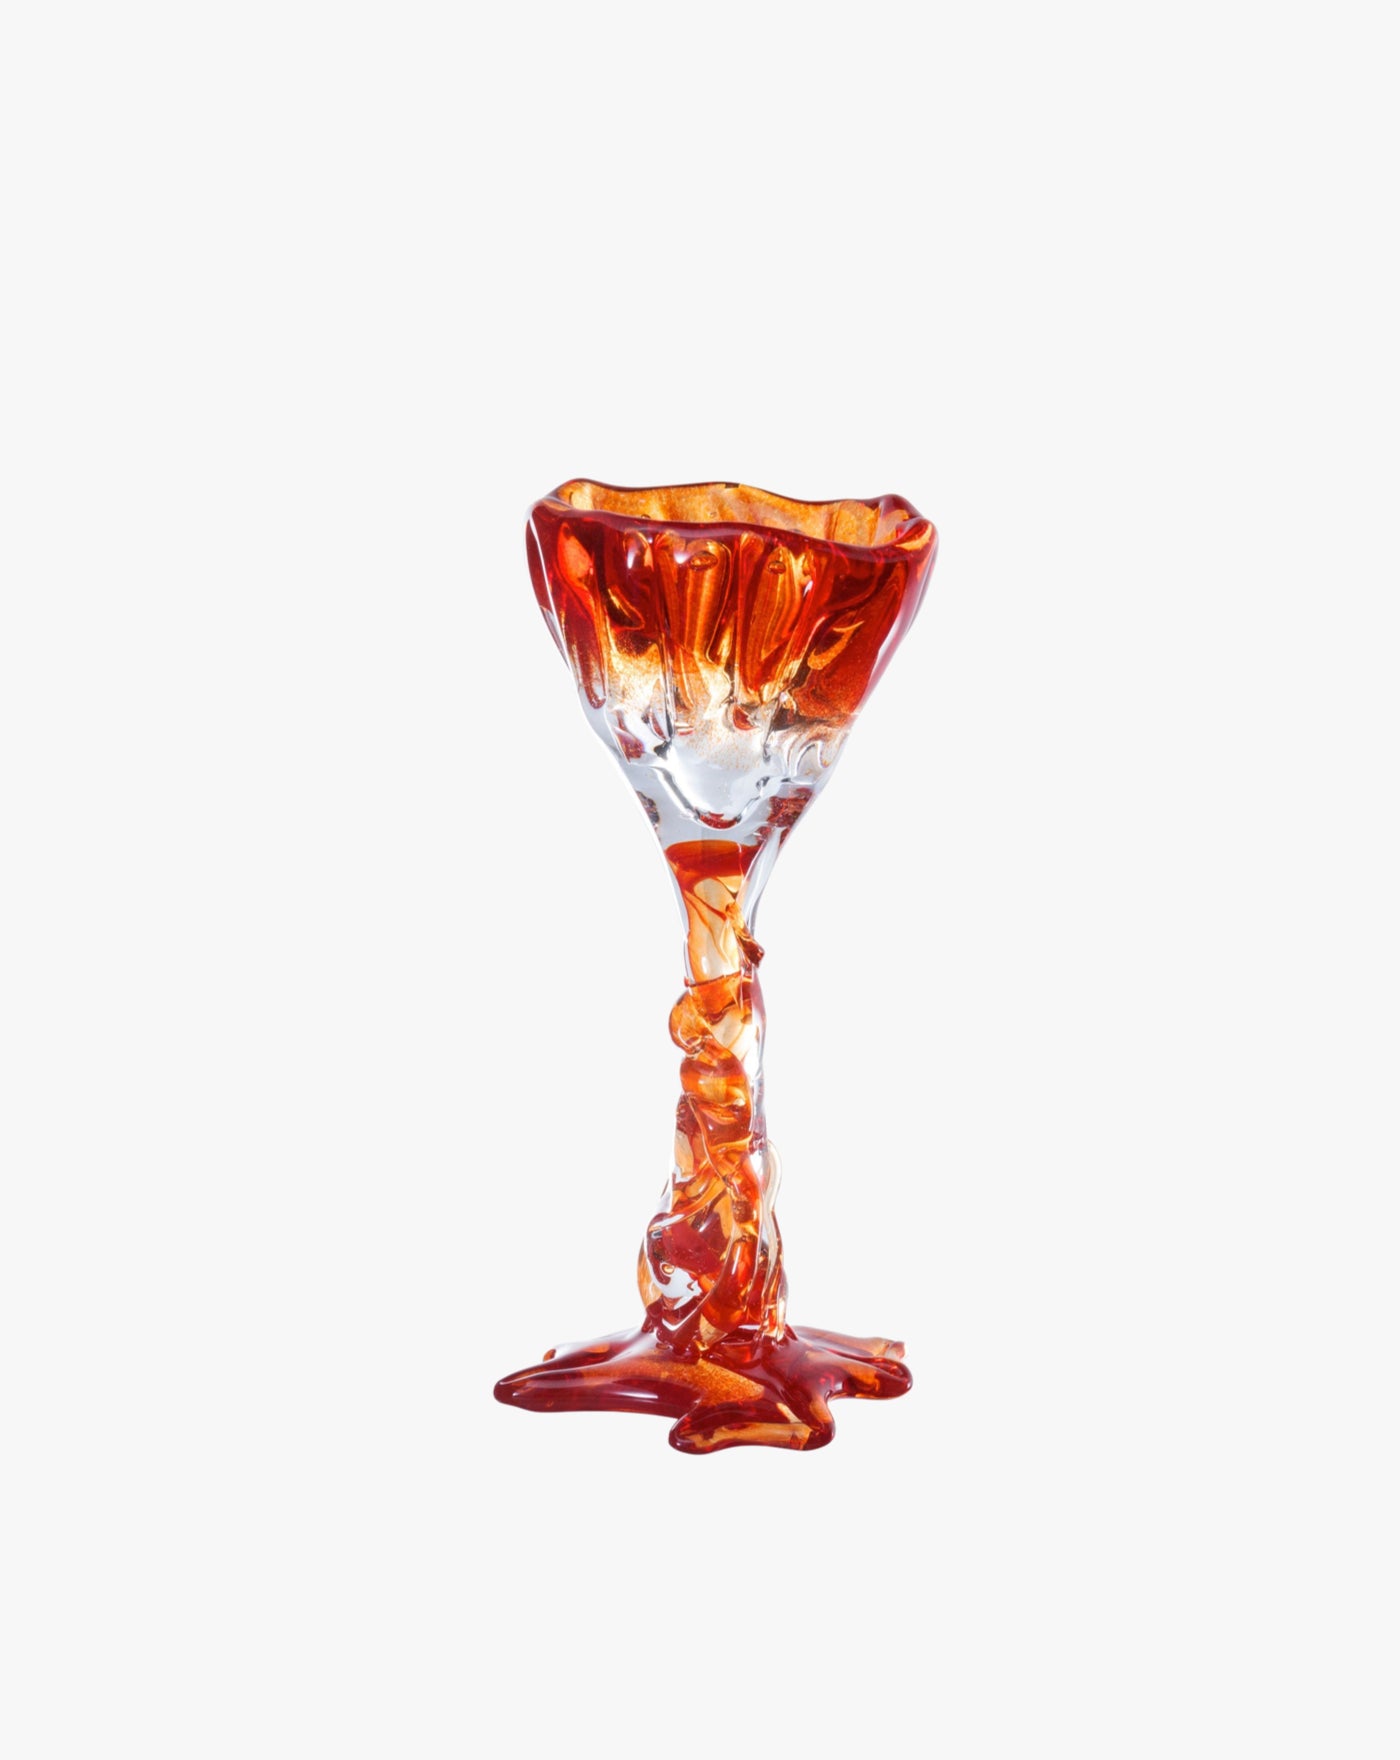 The V-Shaped Martini Glass Is Challenging the Cocktail Coupe